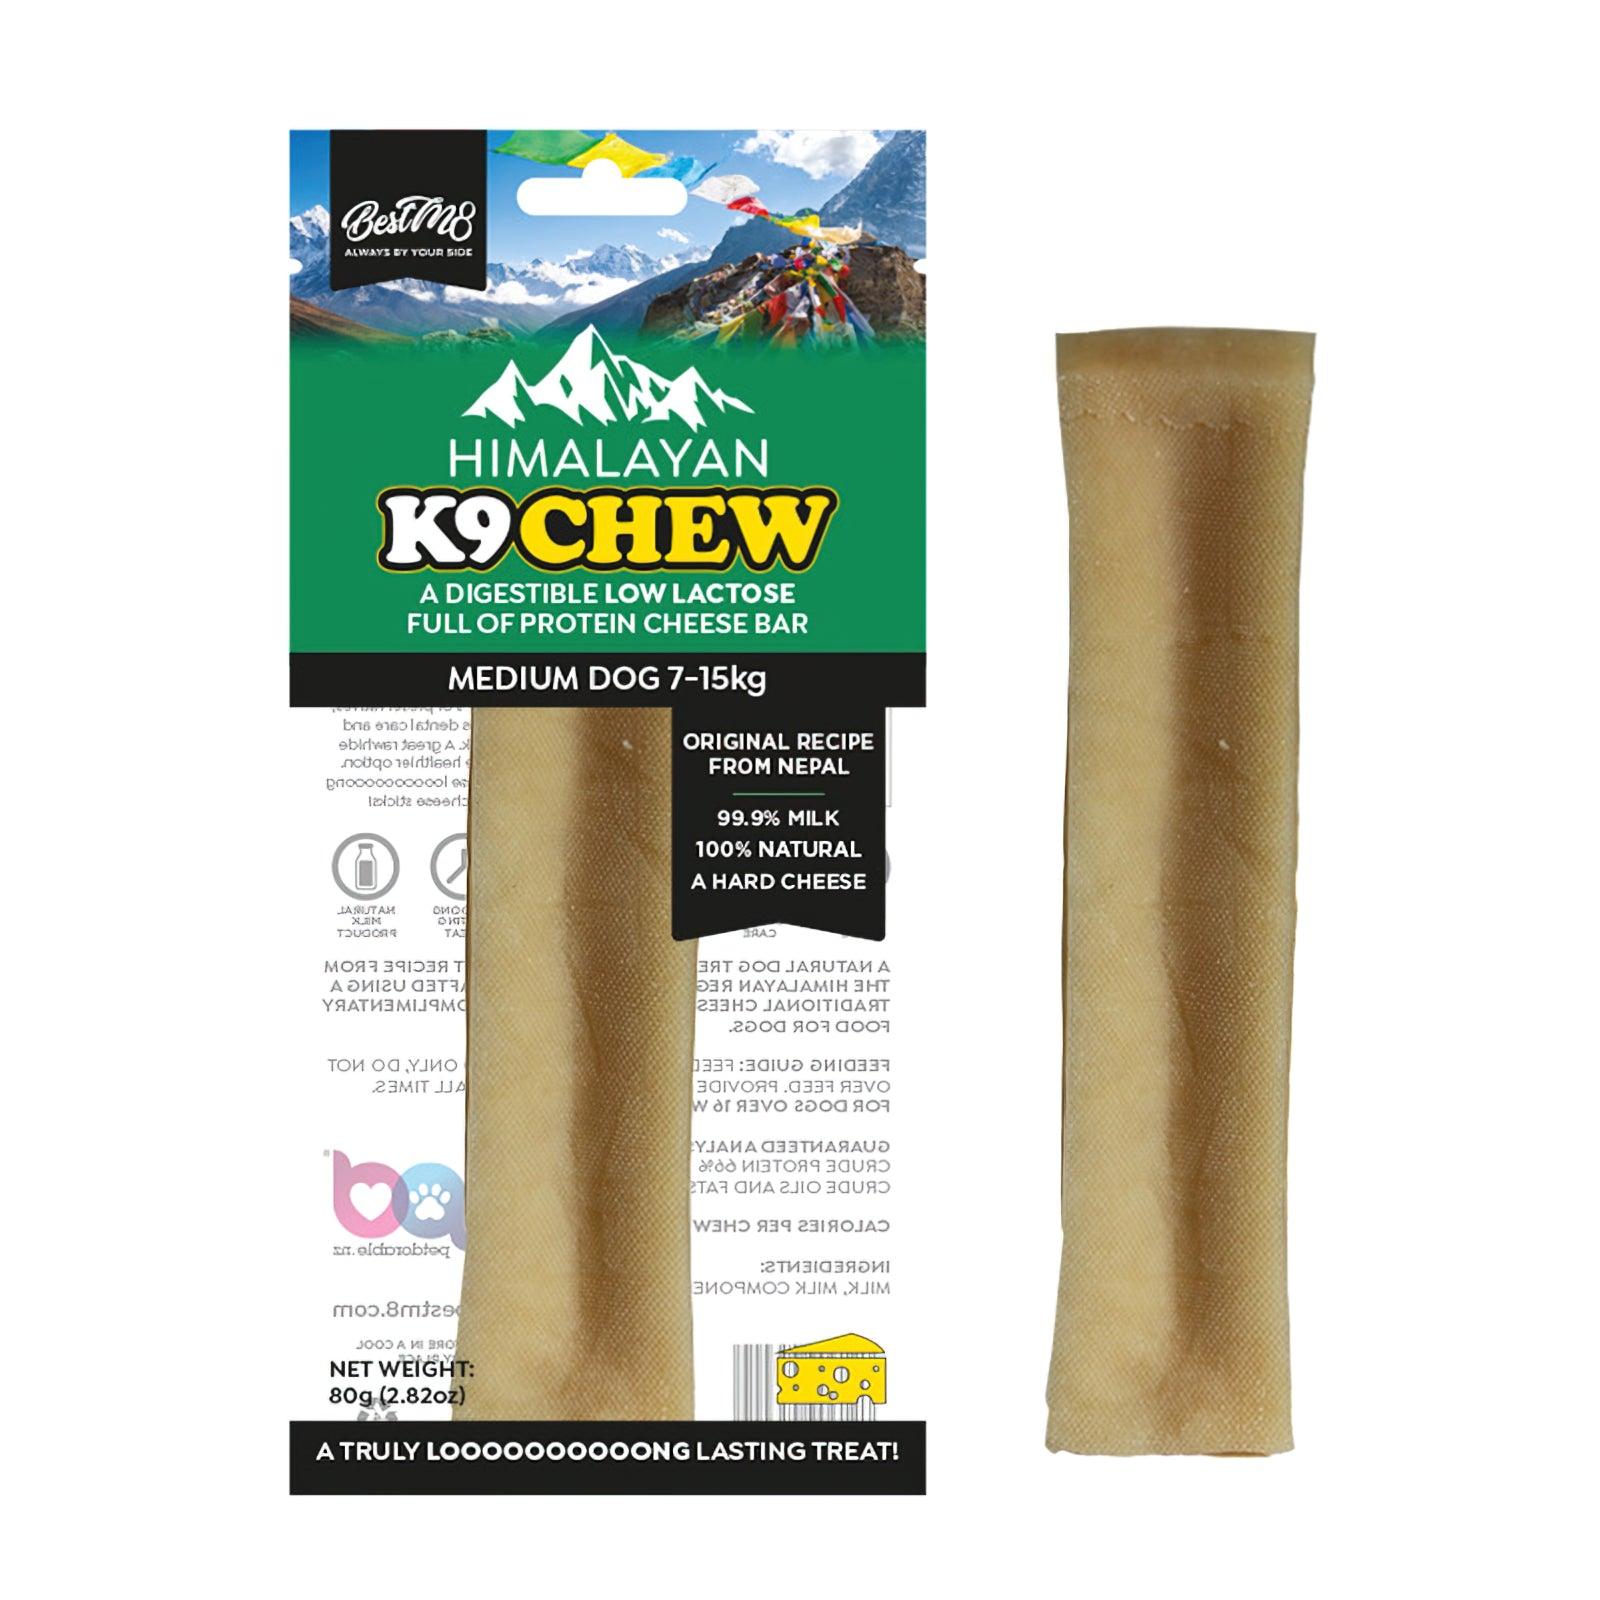 BestM8 Himalayan K9Chew - Long-Lasting Natural Dog Treat for Medium Dogs (7-15kg) - PAWS CLUB